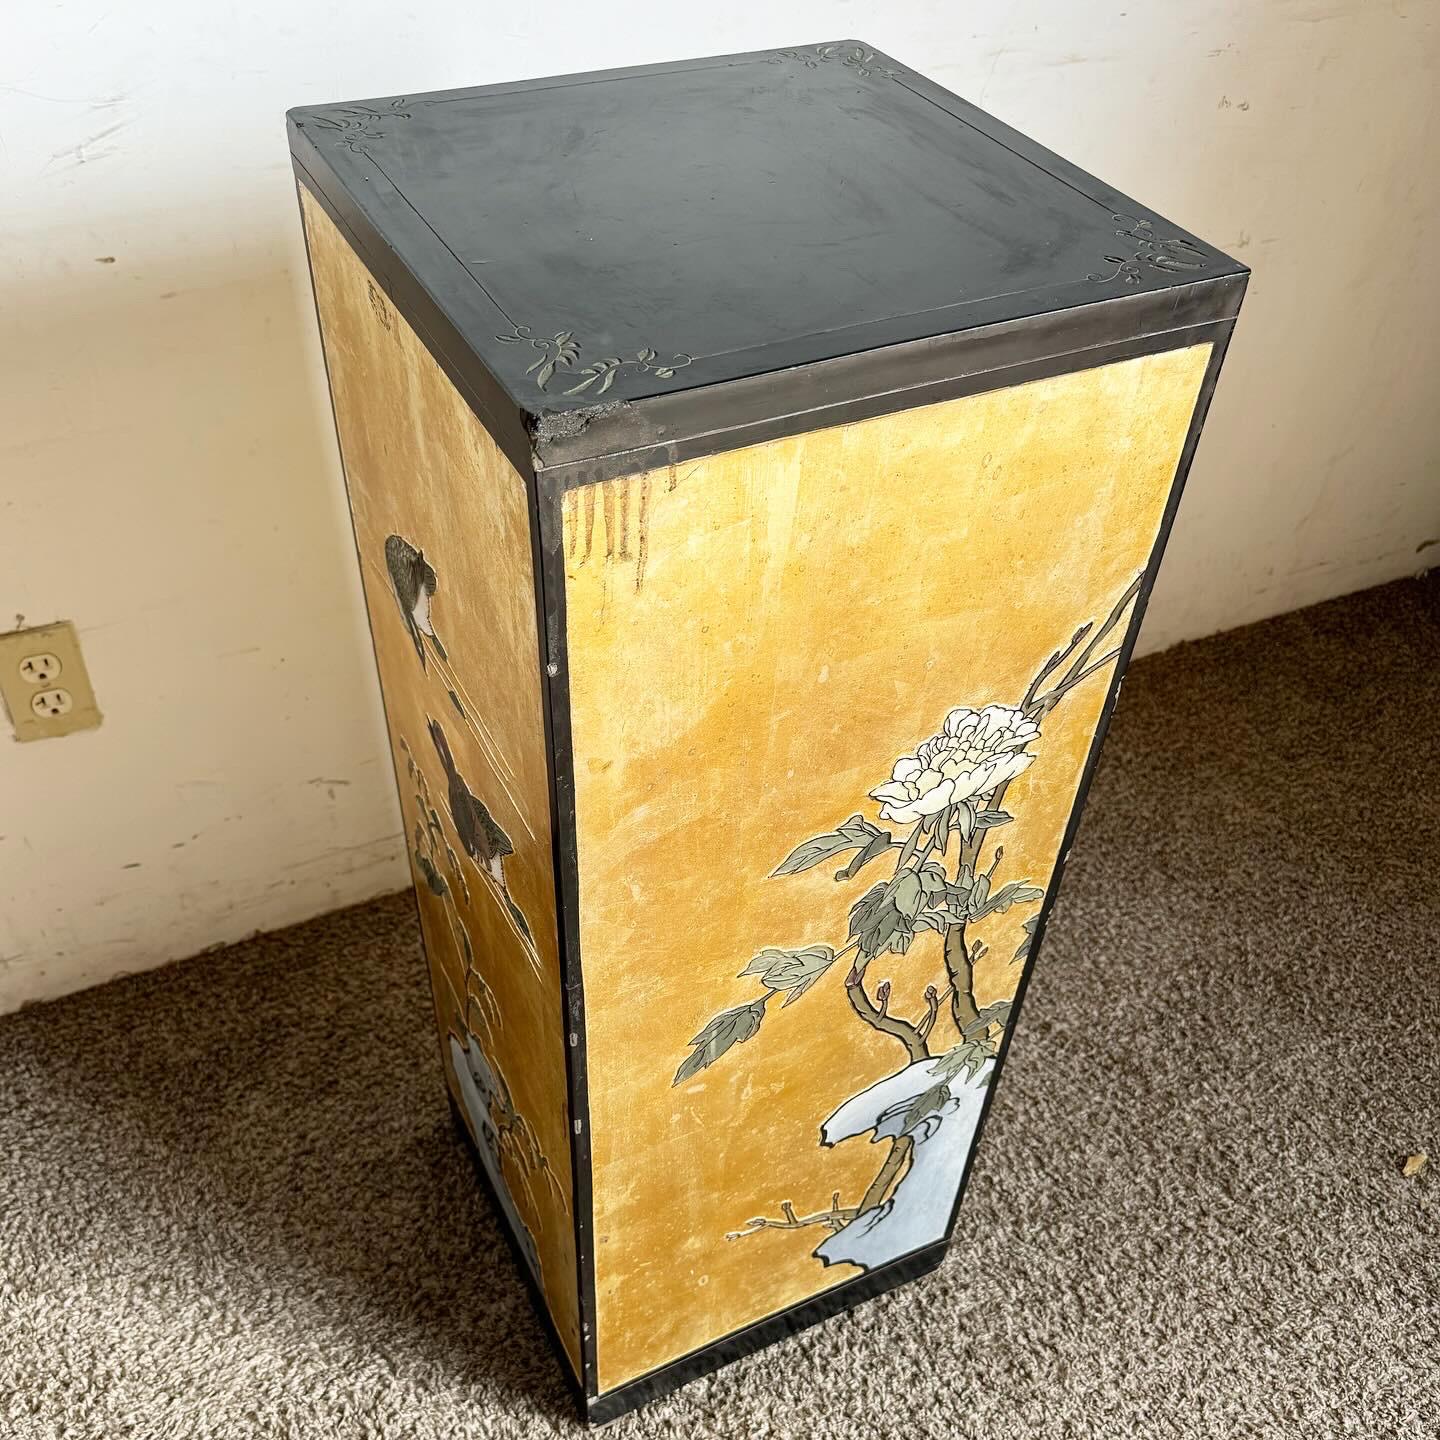 Embrace the elegance of traditional Chinese art with this Black and Gold Hand Painted and Carved Pedestal. Featuring exquisite floral and bird motifs against a gold backdrop, this pedestal is a striking display of craftsmanship. The rich black base